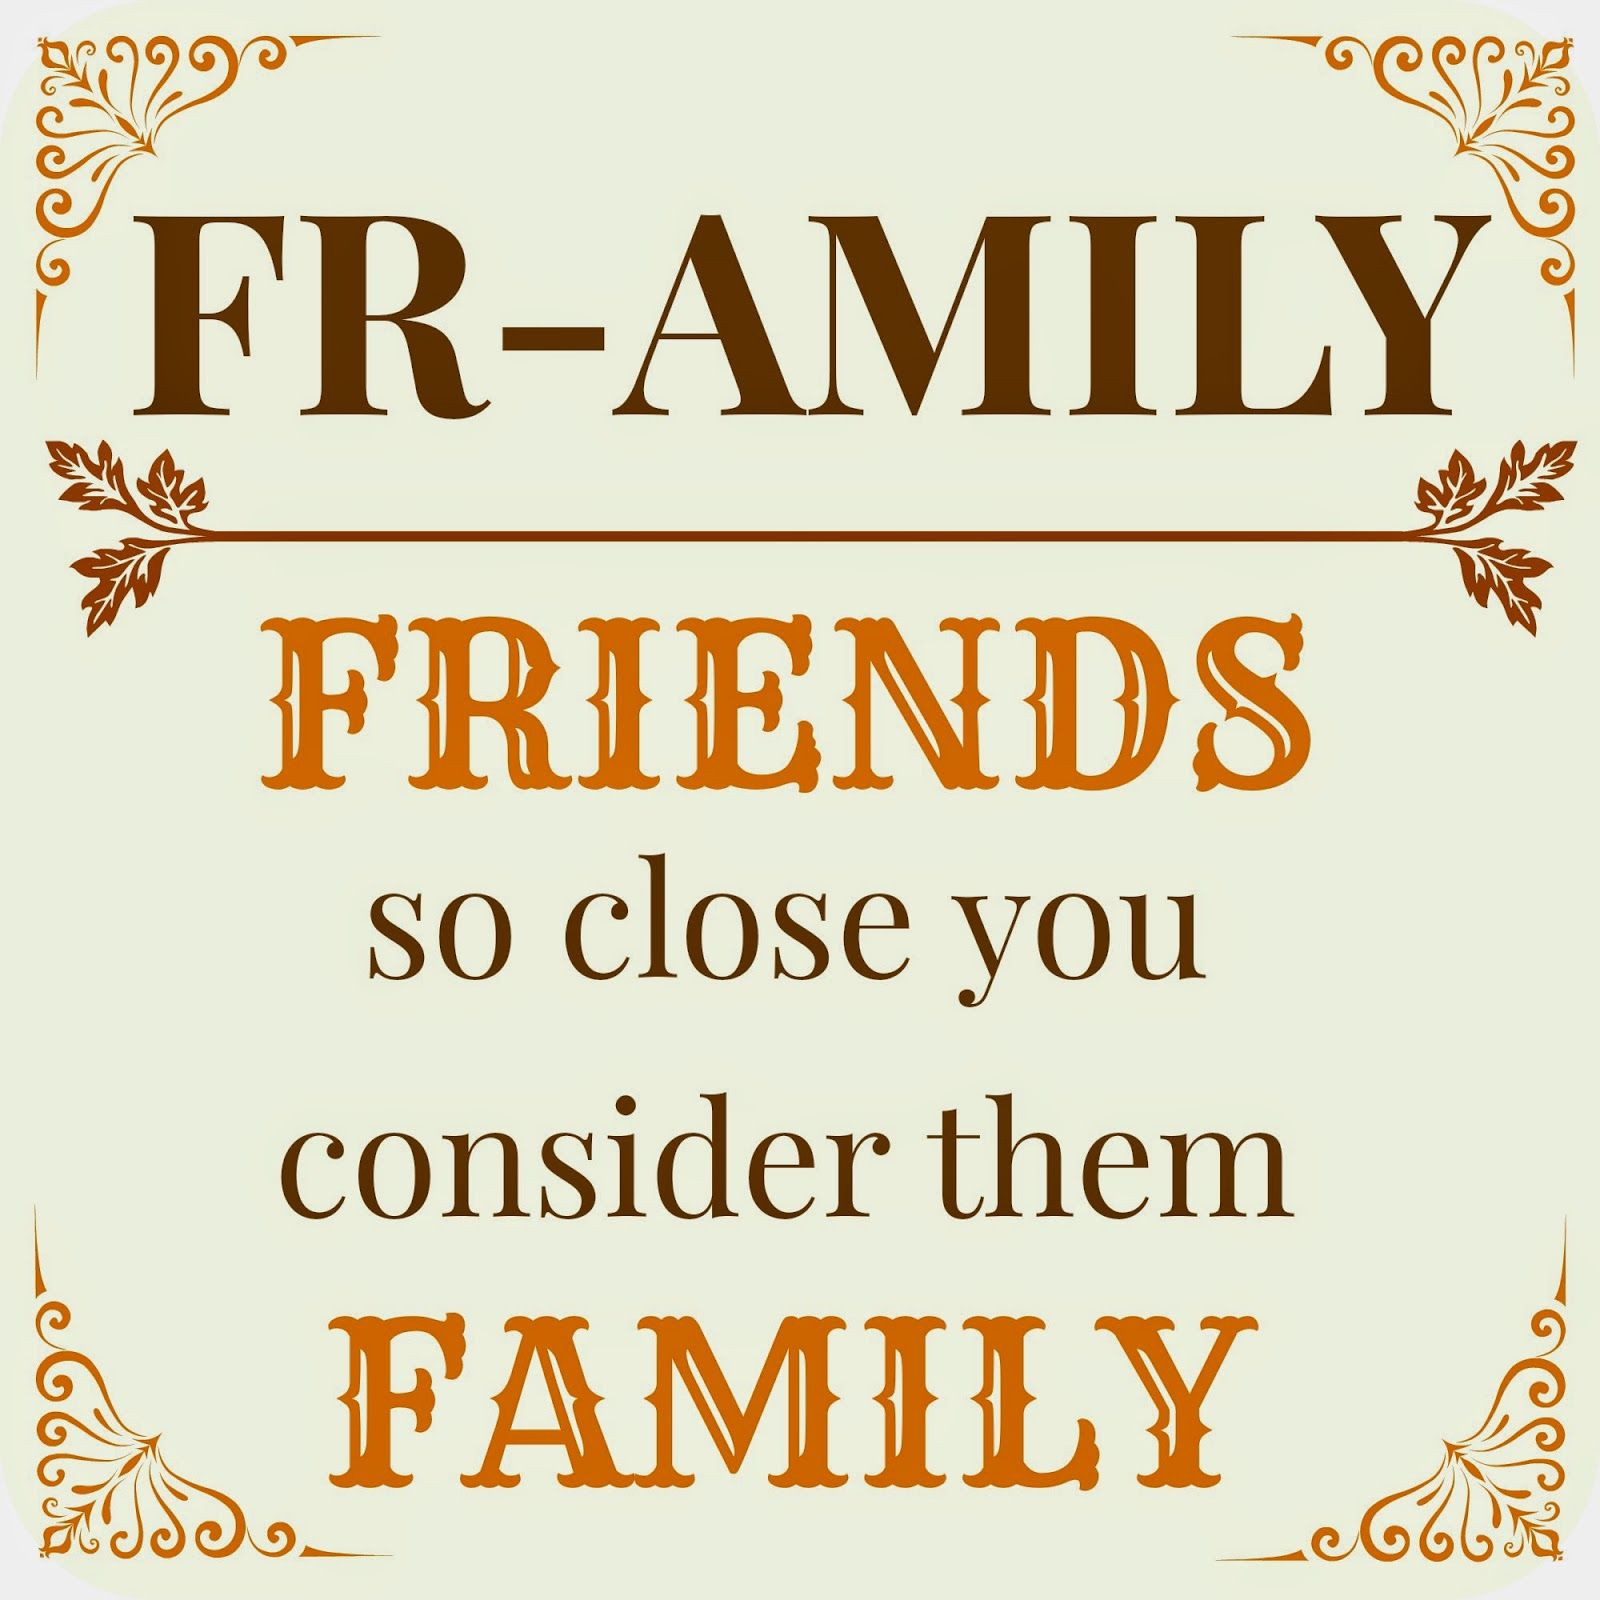 Best Friend Family Quotes
 Quotes About Friends Considered Family QuotesGram by